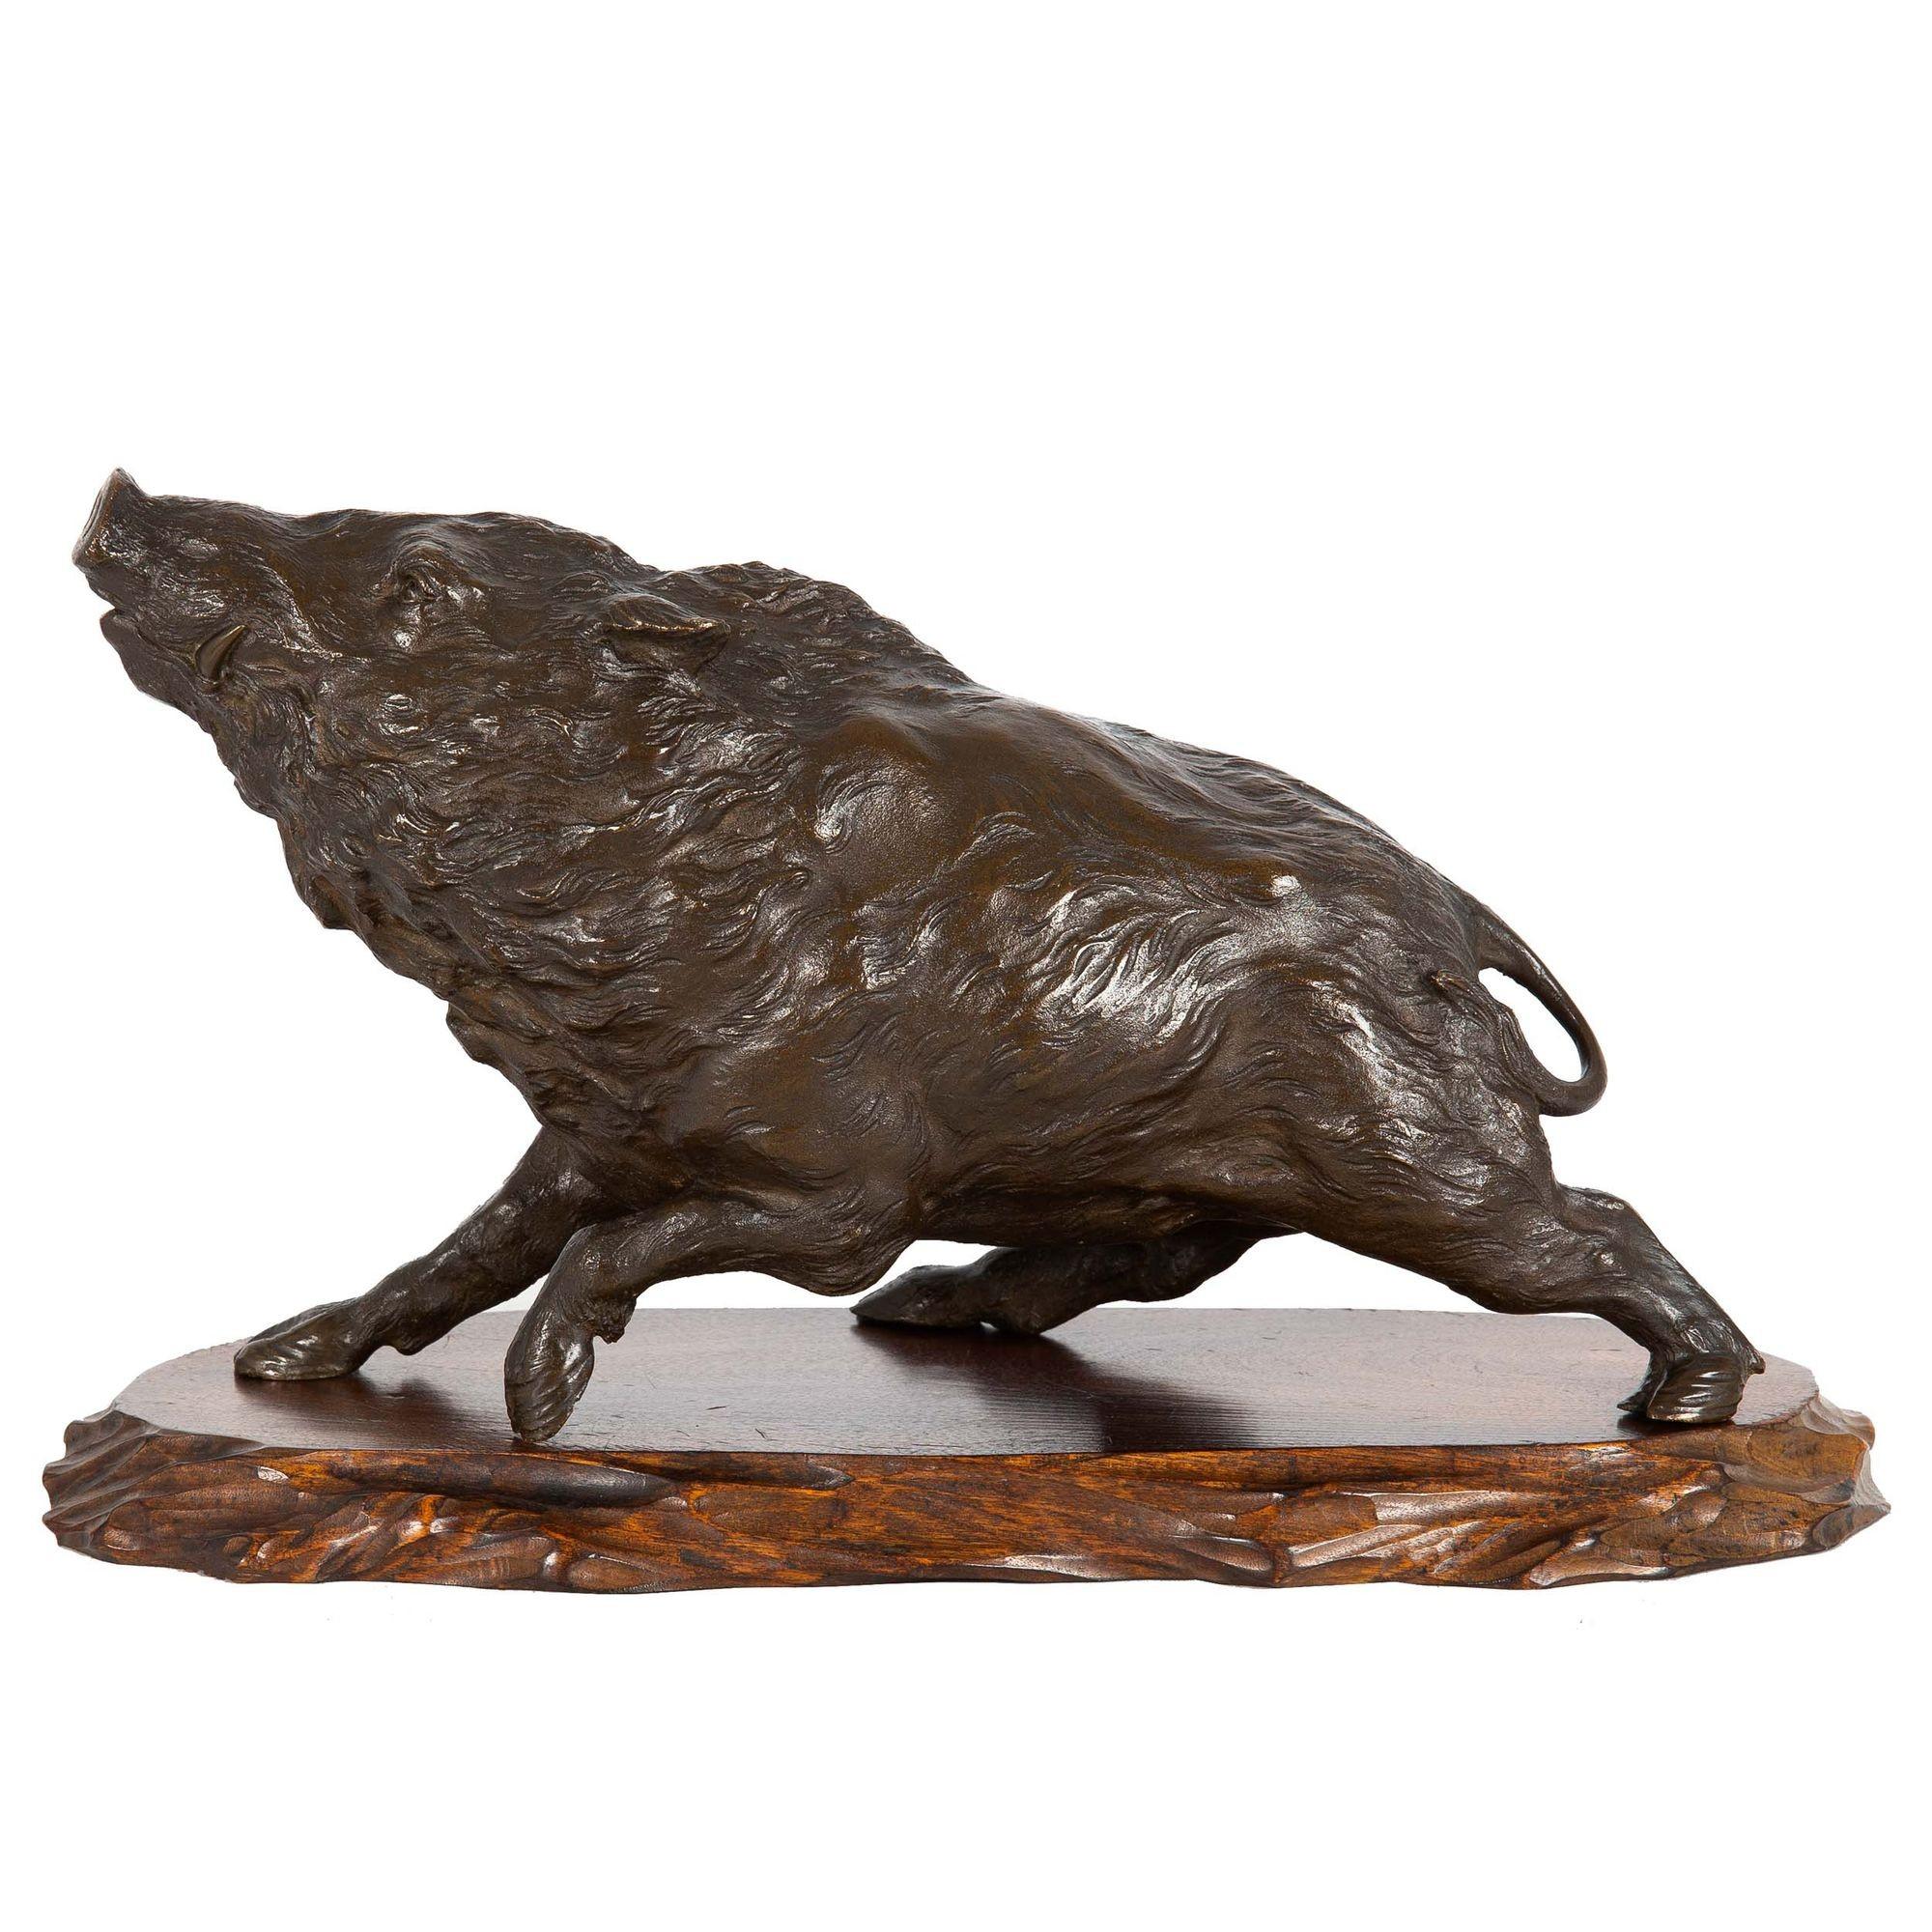 OKIMONO OF A WILD BOAR
Japan, Meiji Period  Patinated bronze over carved hardwood base  Signed 